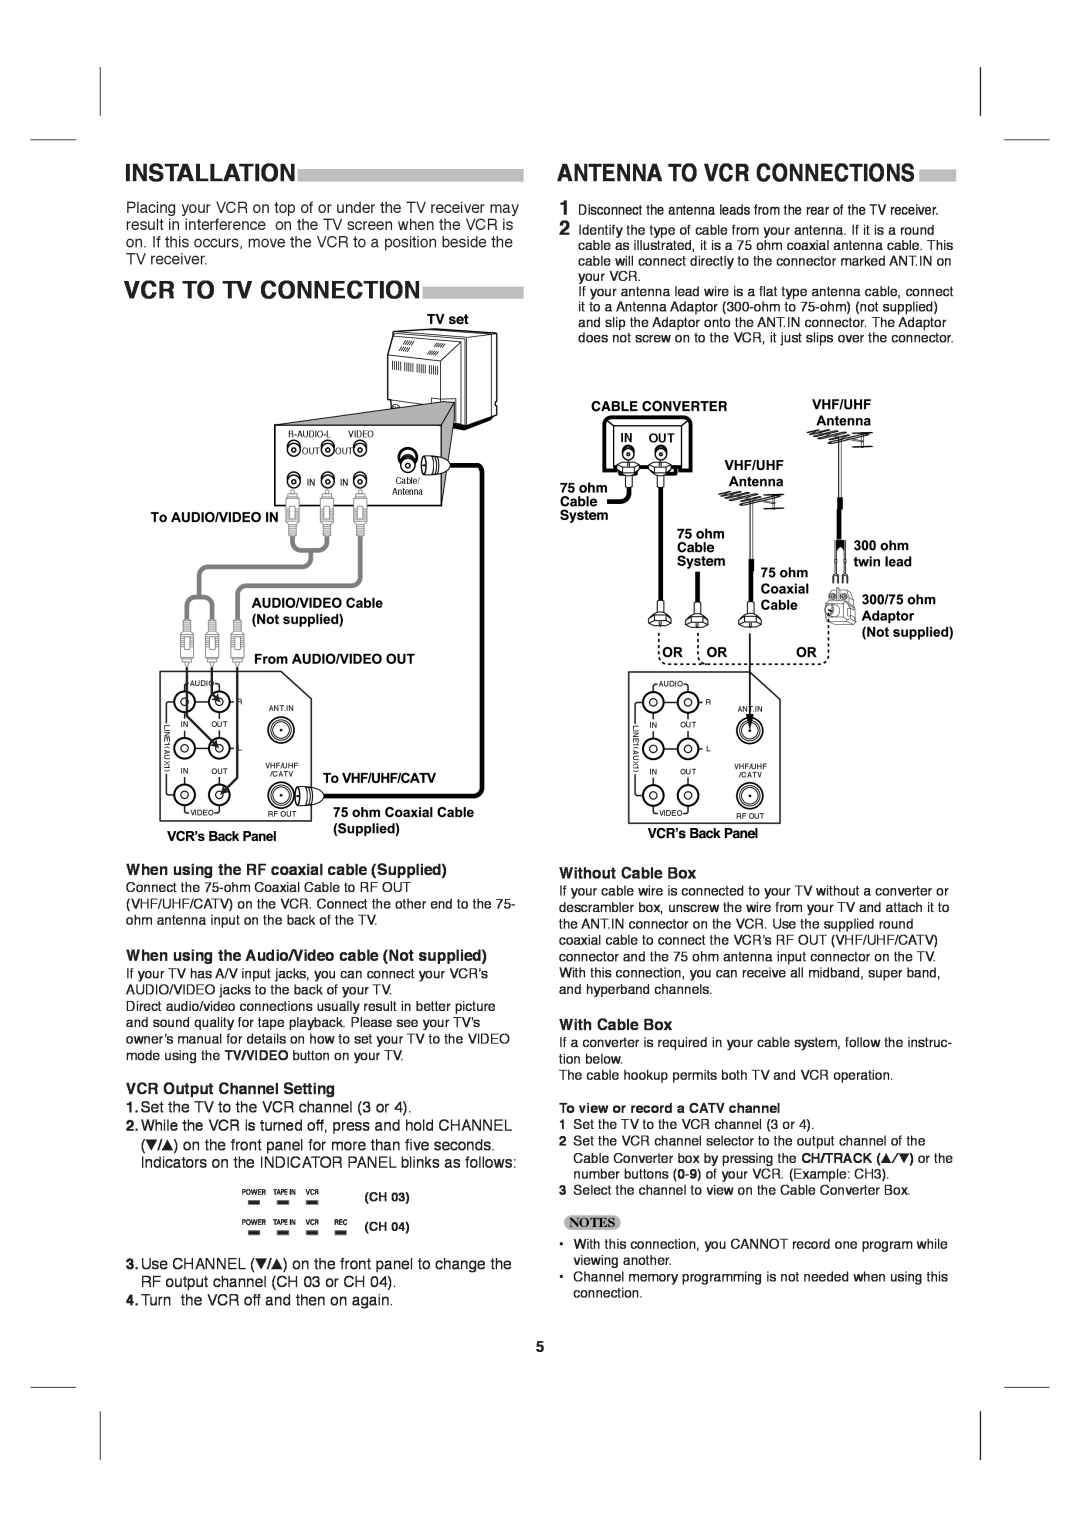 Sanyo VWM-900 Installation, Vcr To Tv Connection, Antenna To Vcr Connections, When using the RF coaxial cable Supplied 